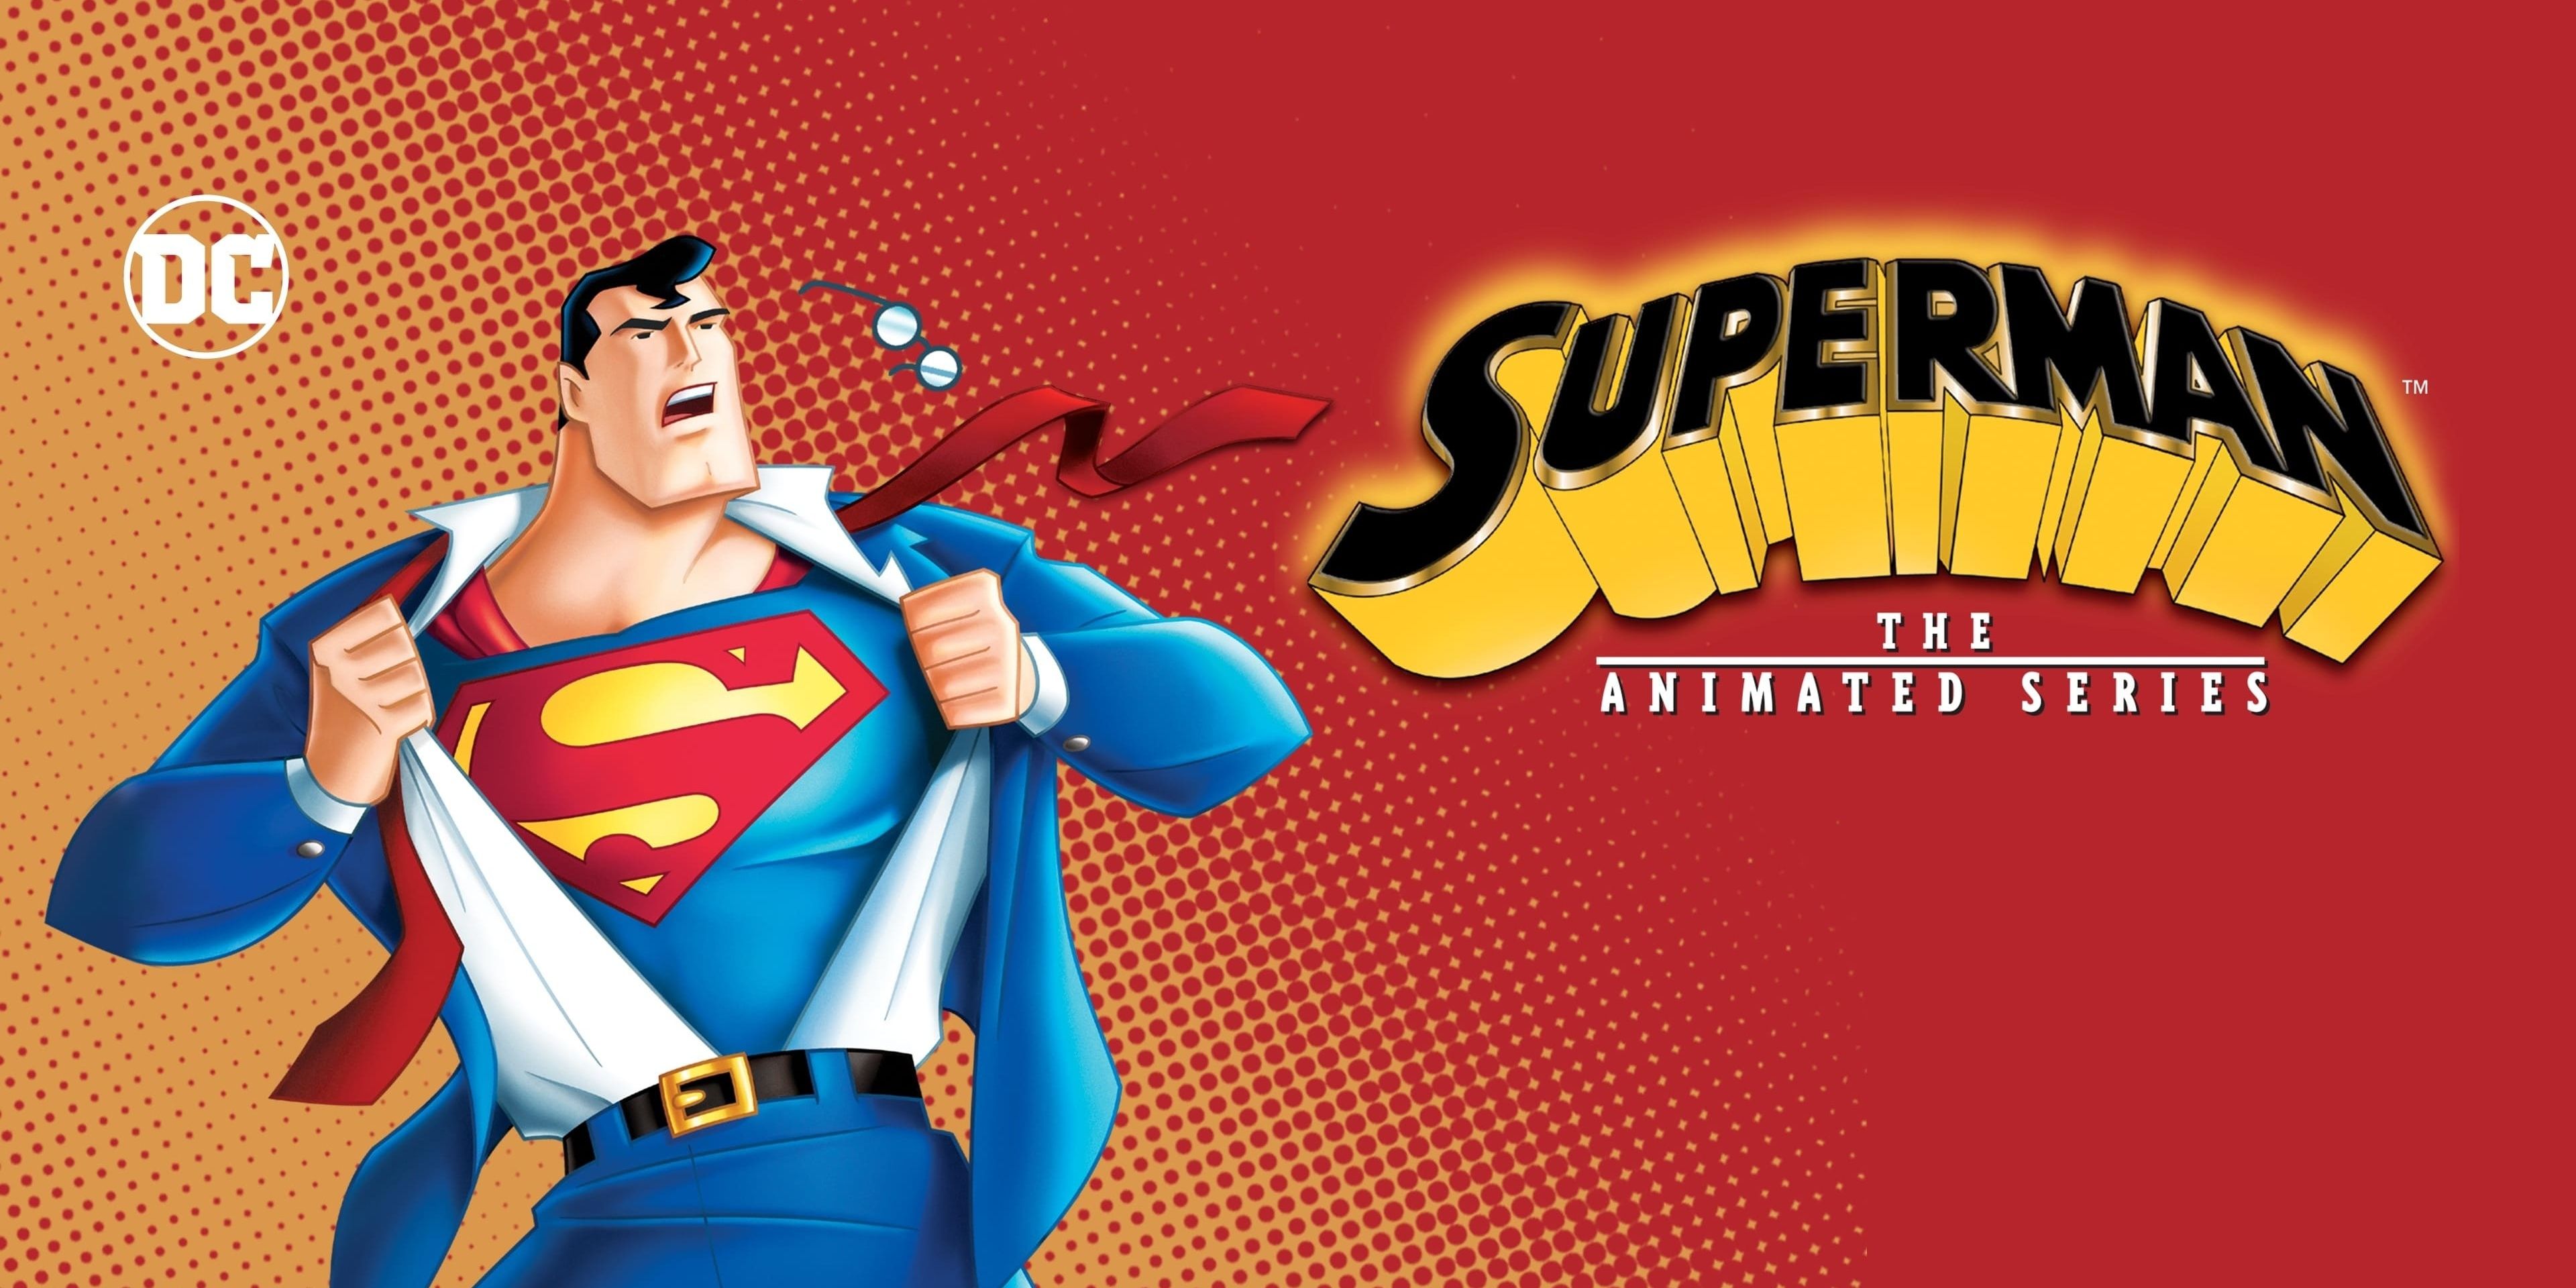 Why is the Superman Animated Series Not as Fondly Remembered as Batman?